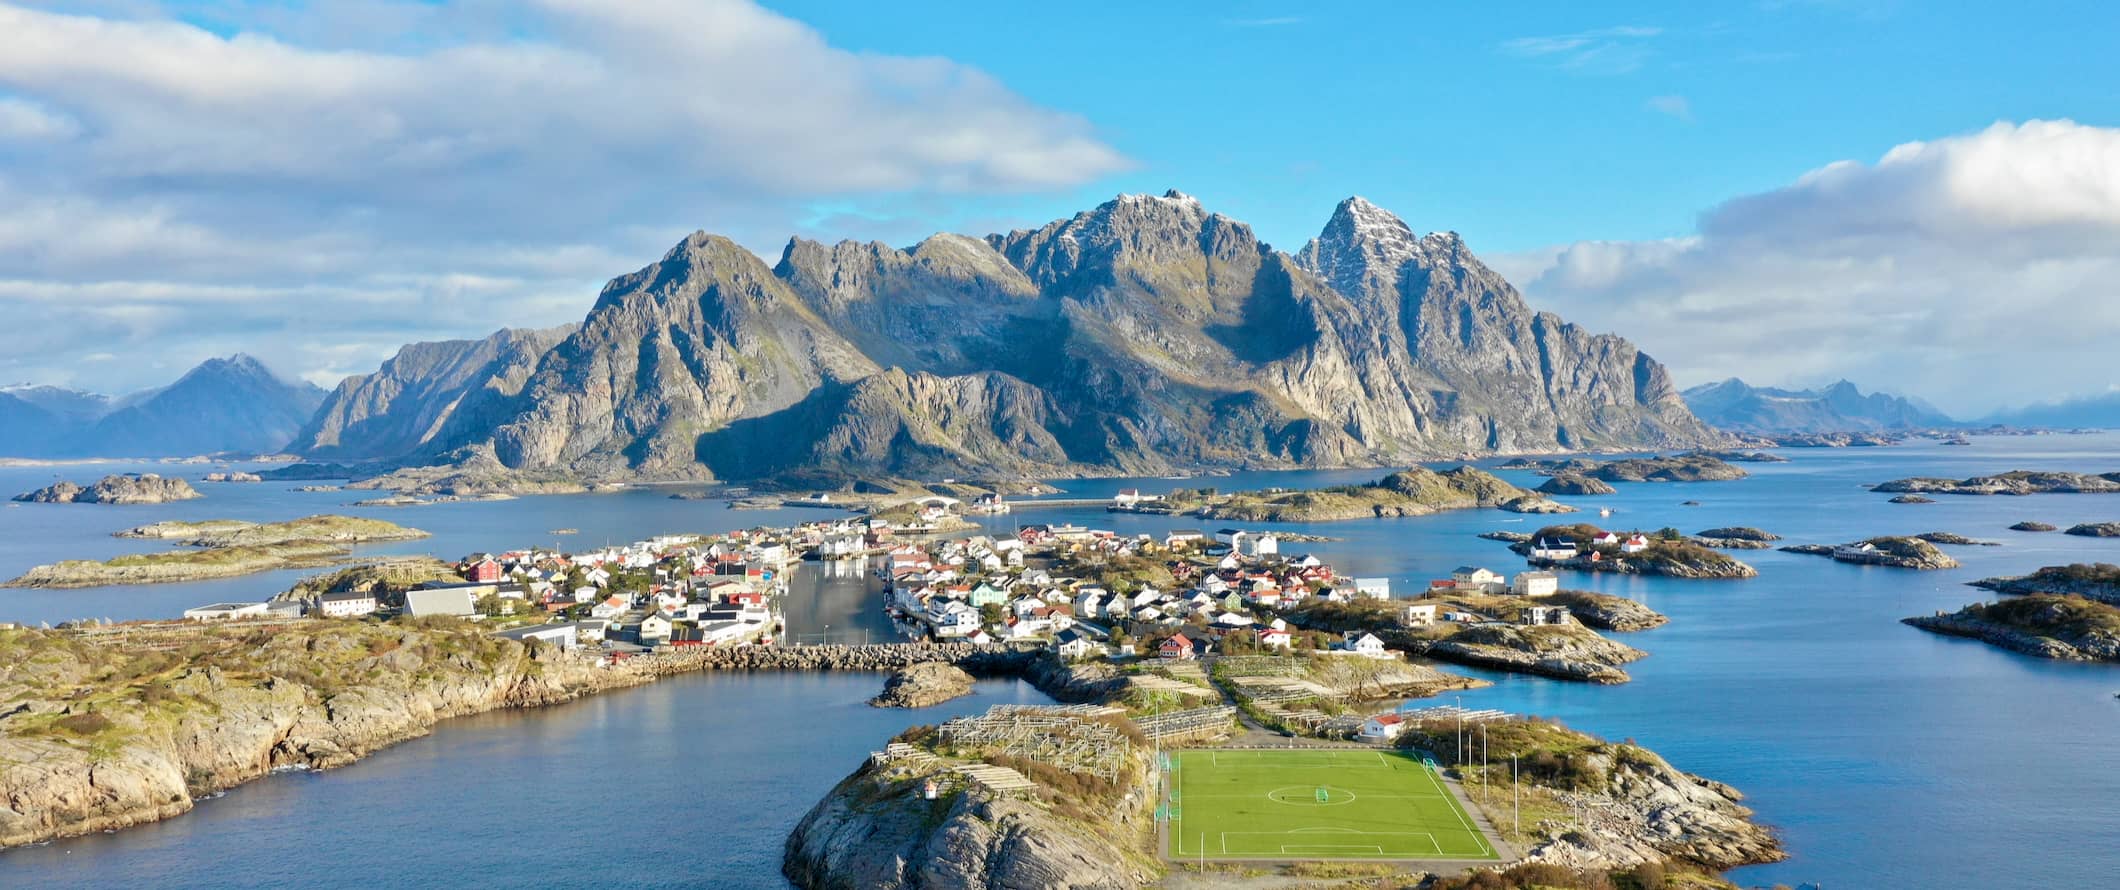 The beautiful, rugged mountains overlooking Lofoten in northern Norway